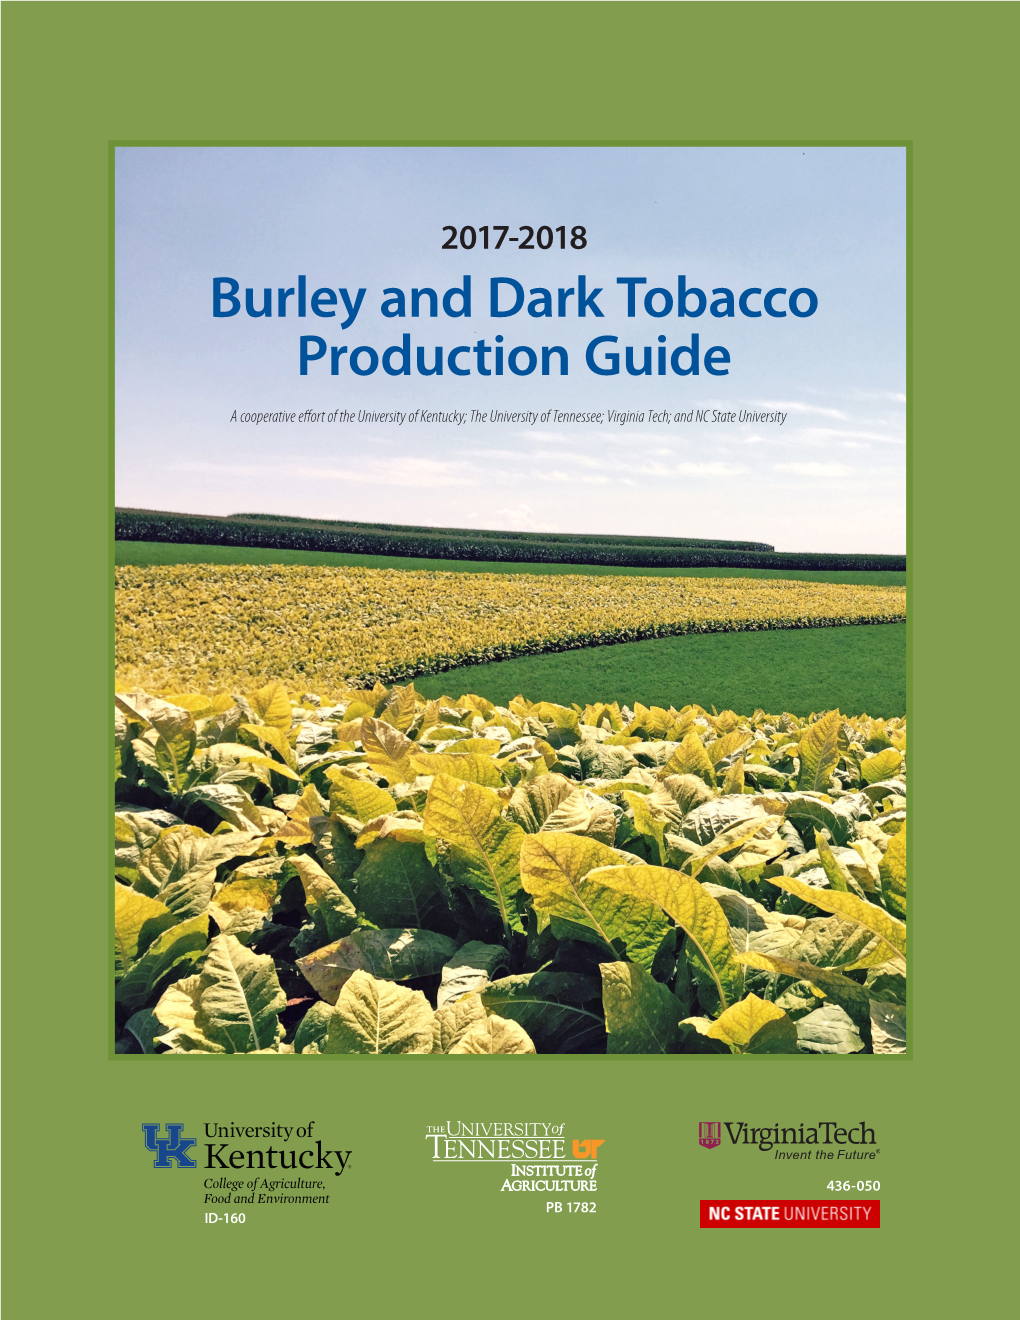 Burley and Dark Tobacco Production Guide